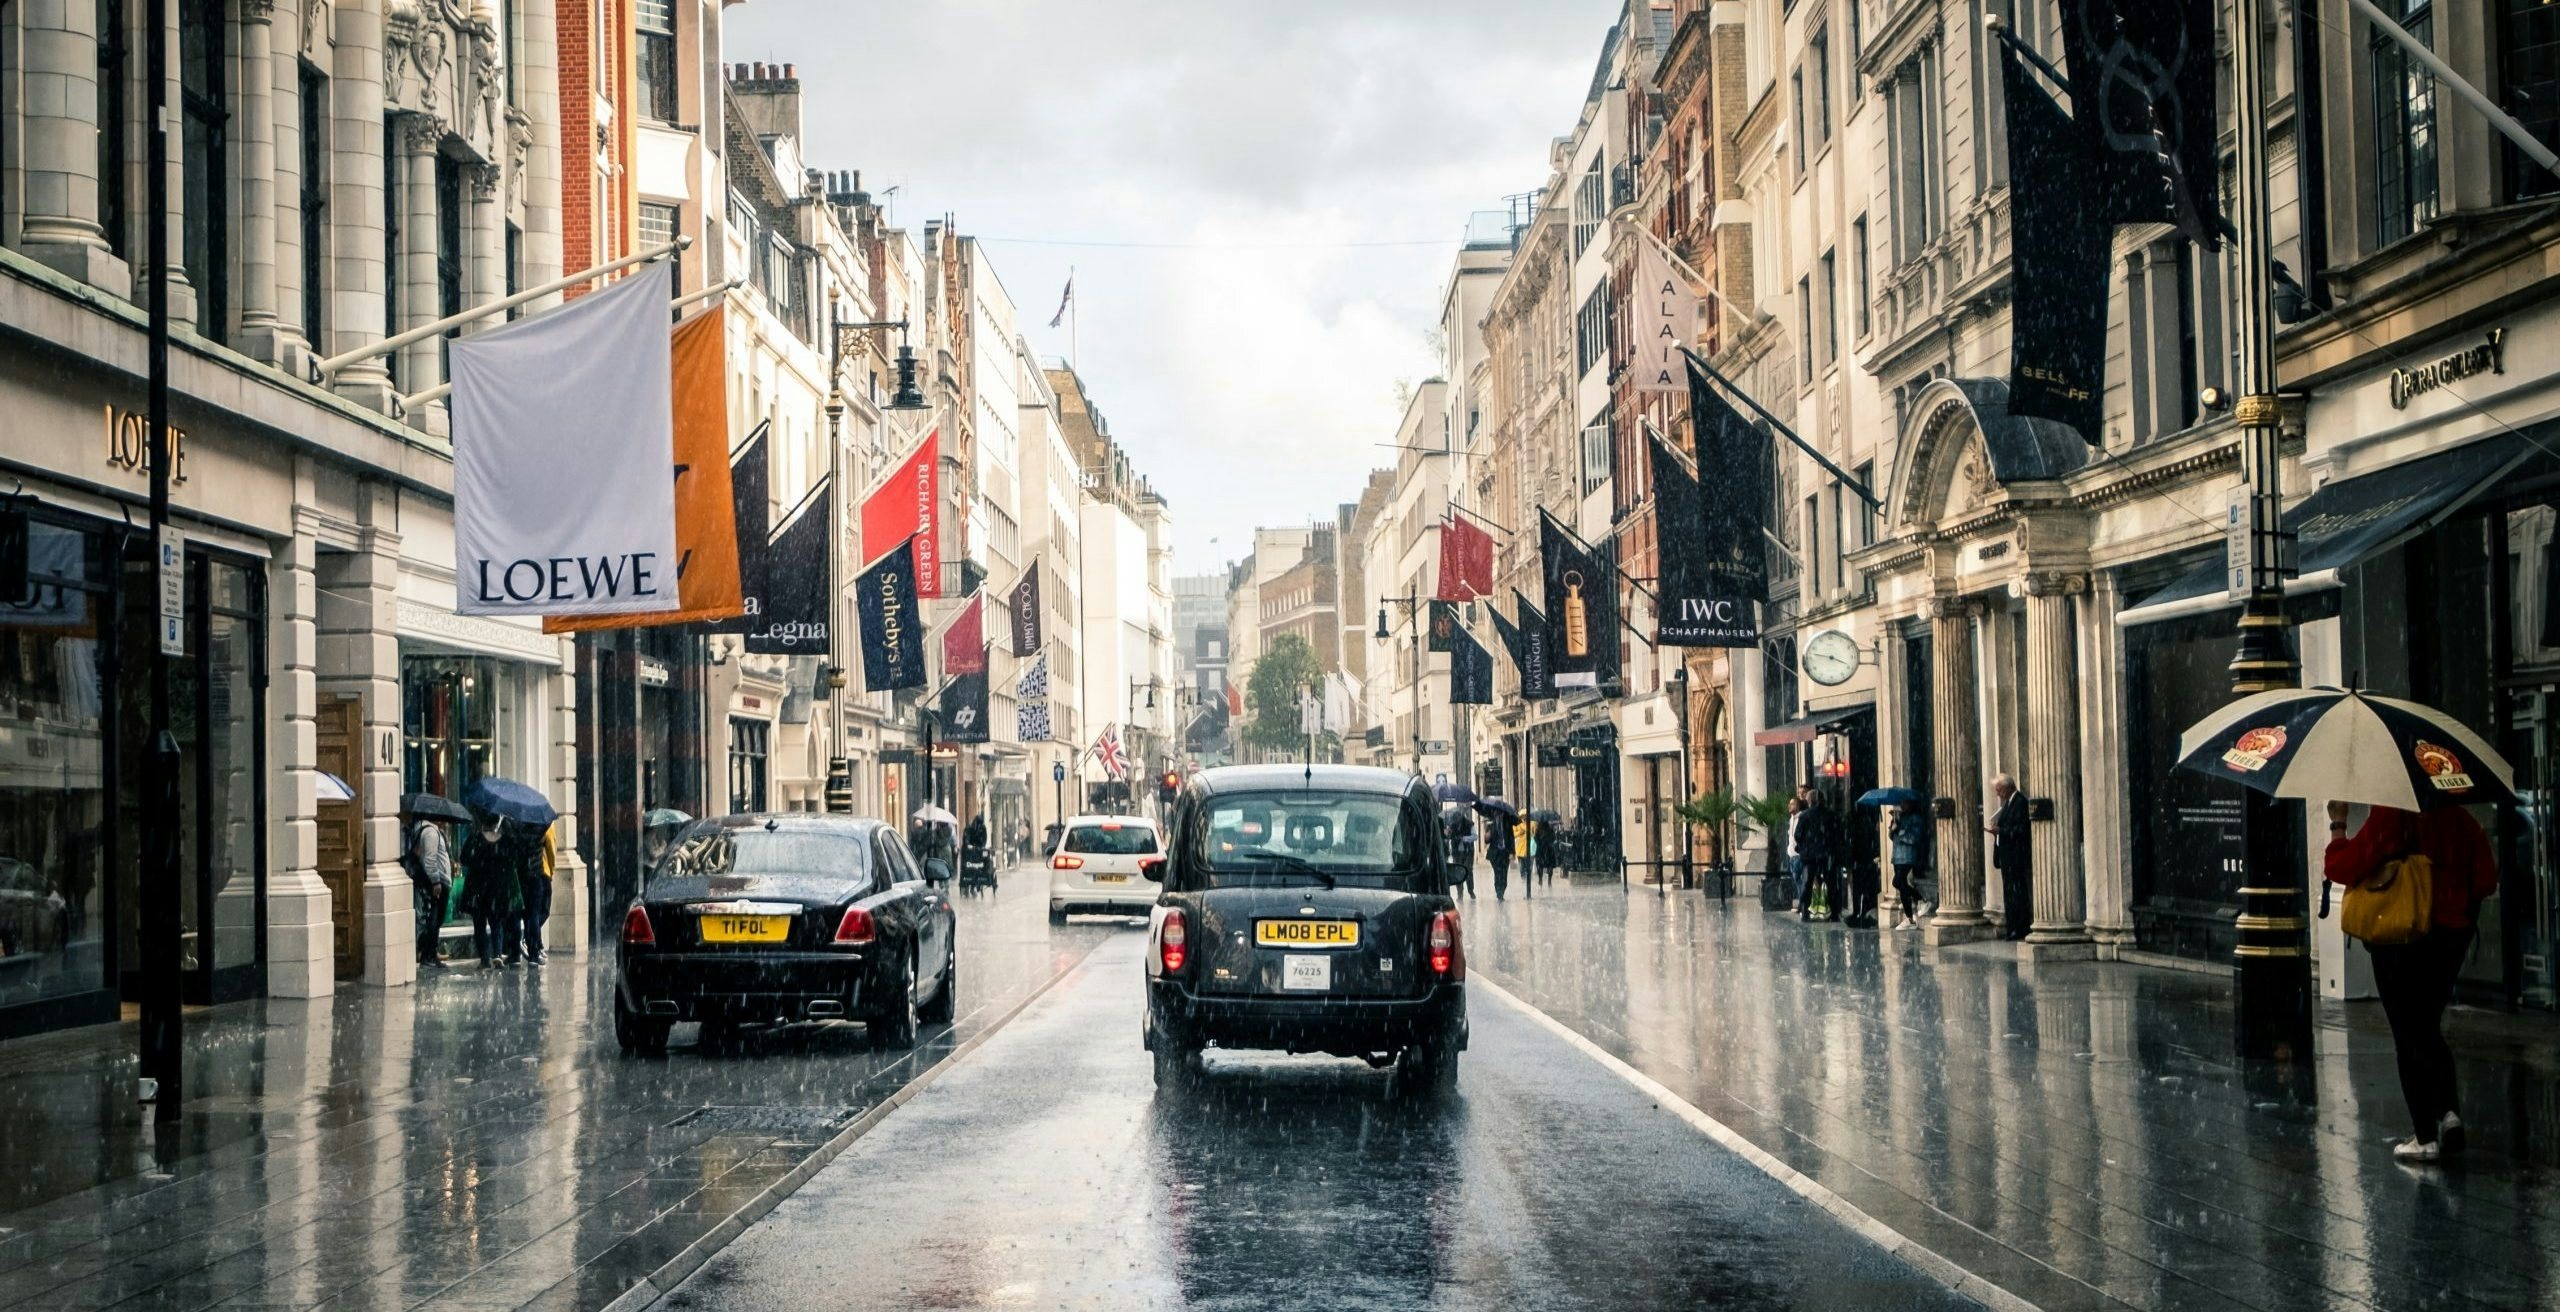 London remains one of the most valuable economic drivers of retail among luxury Chinese consumers. Photo: Shutterstock